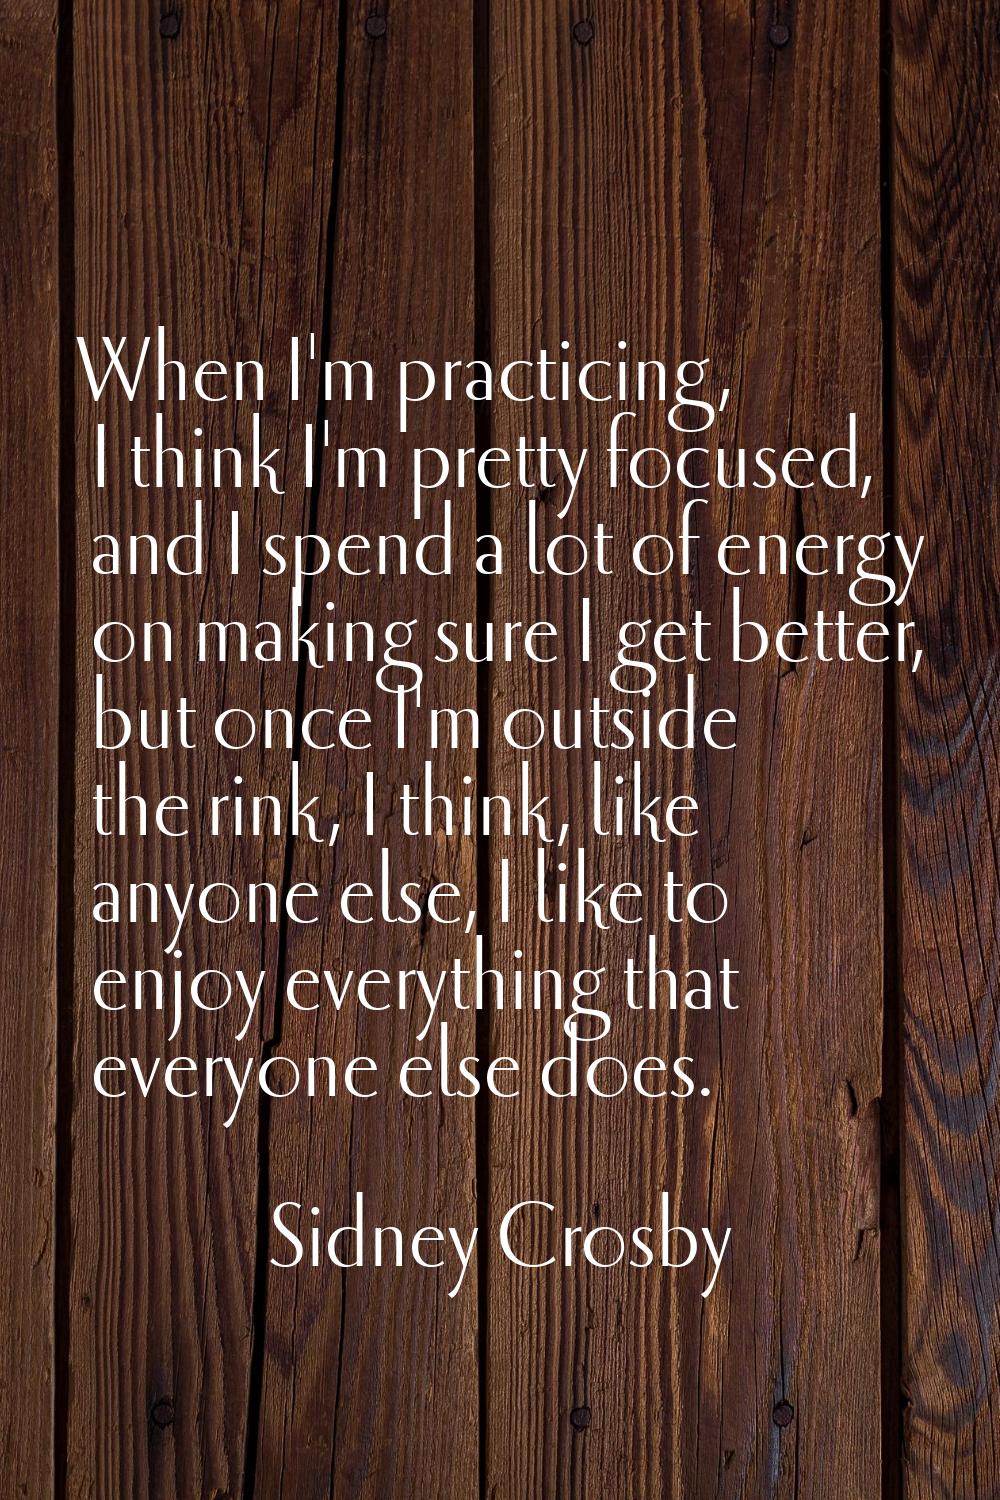 When I'm practicing, I think I'm pretty focused, and I spend a lot of energy on making sure I get b